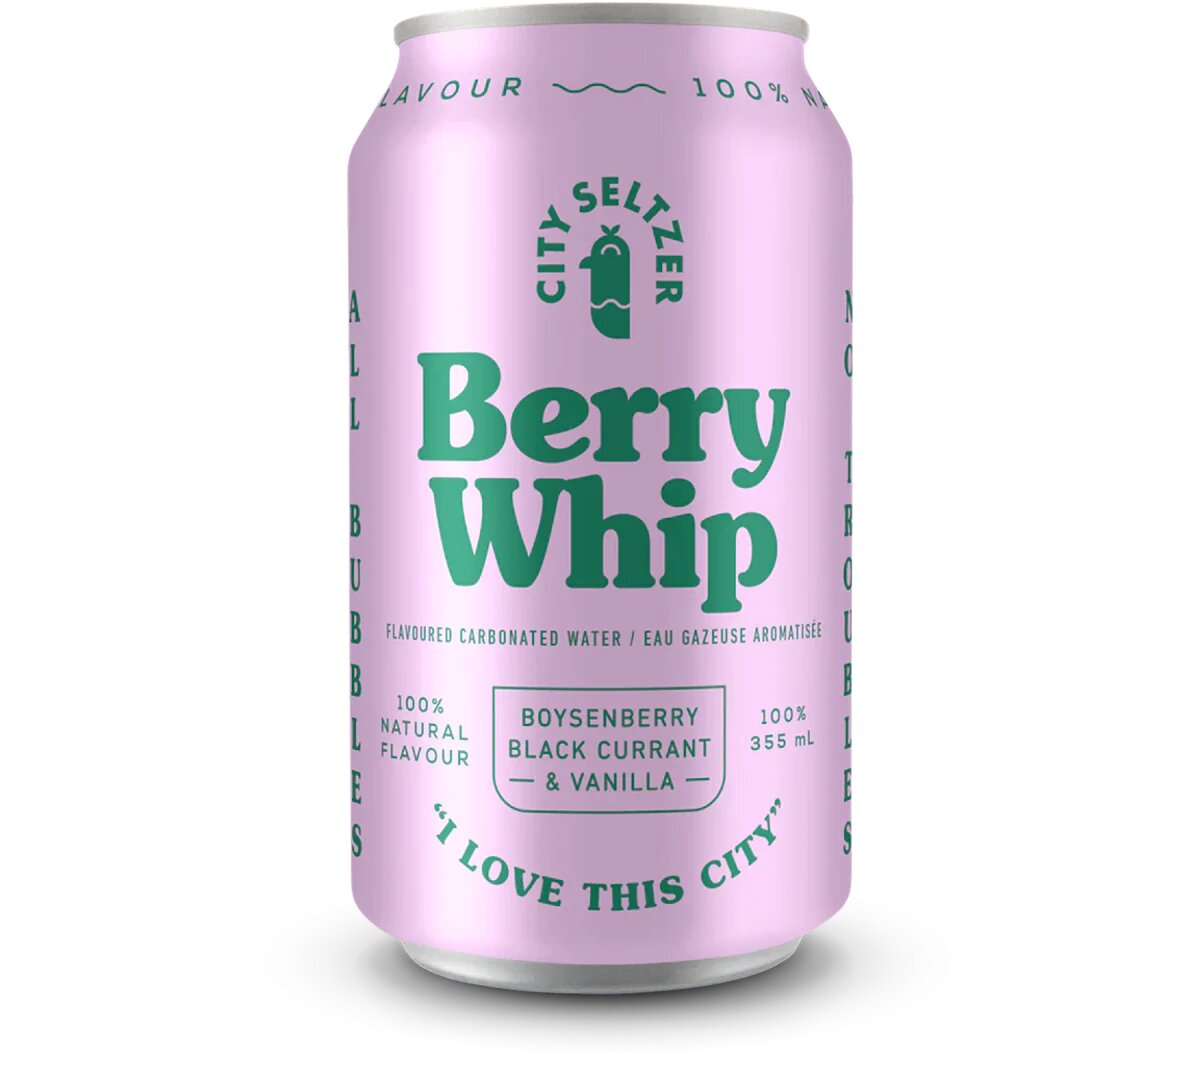 Flavoured Carbonated Water Berry Whip / 355ml